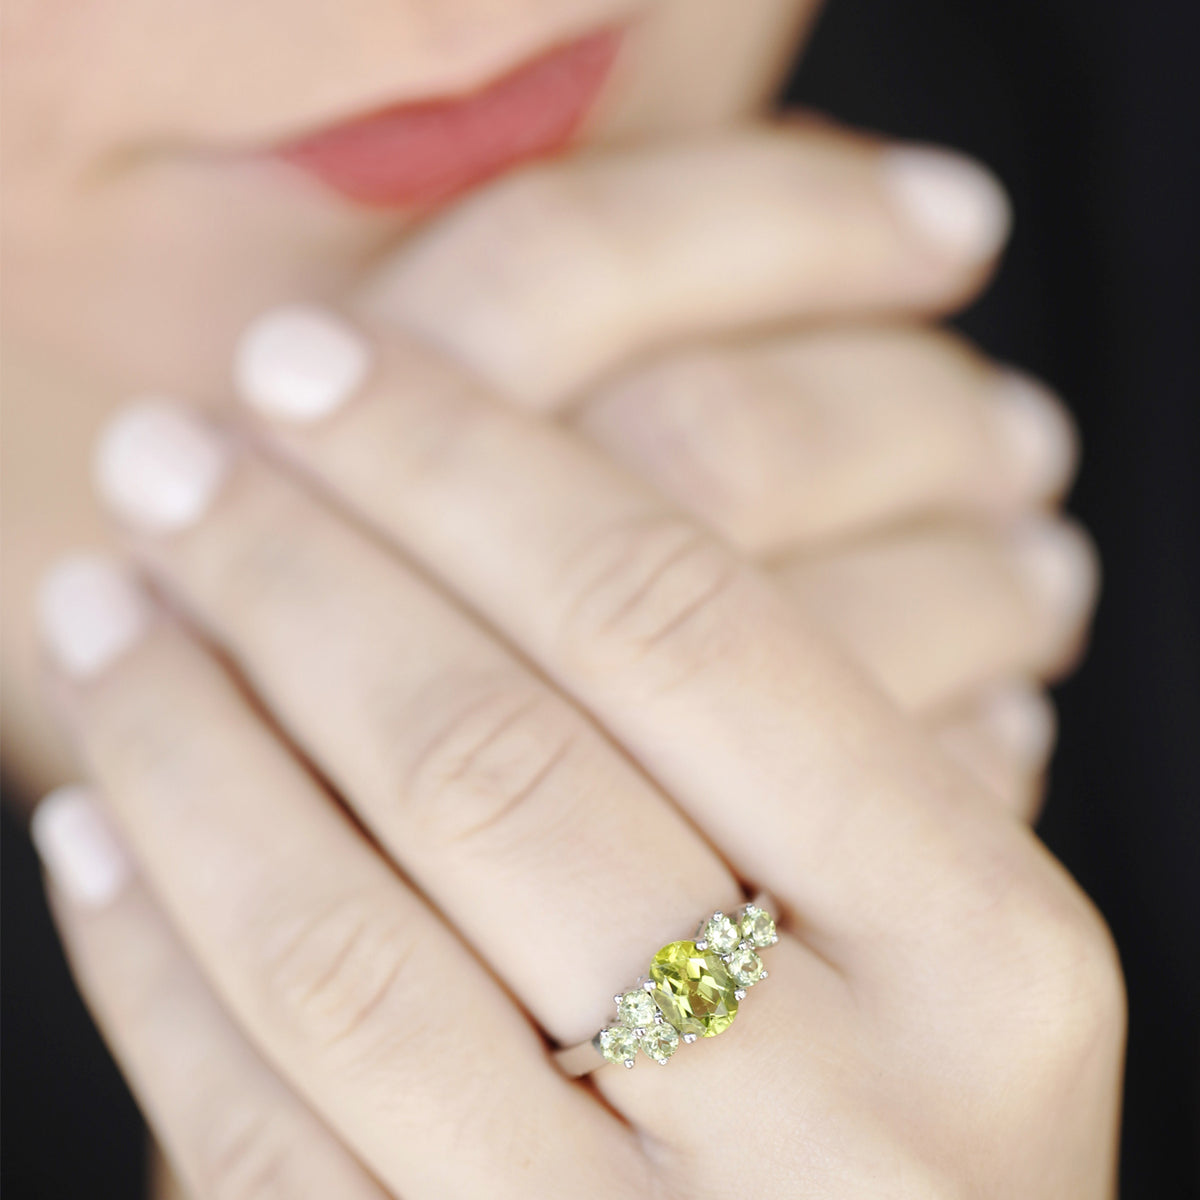 Silver Ring with Peridot, sterling silver ring, silver ring, peridot ring, gemstone ring